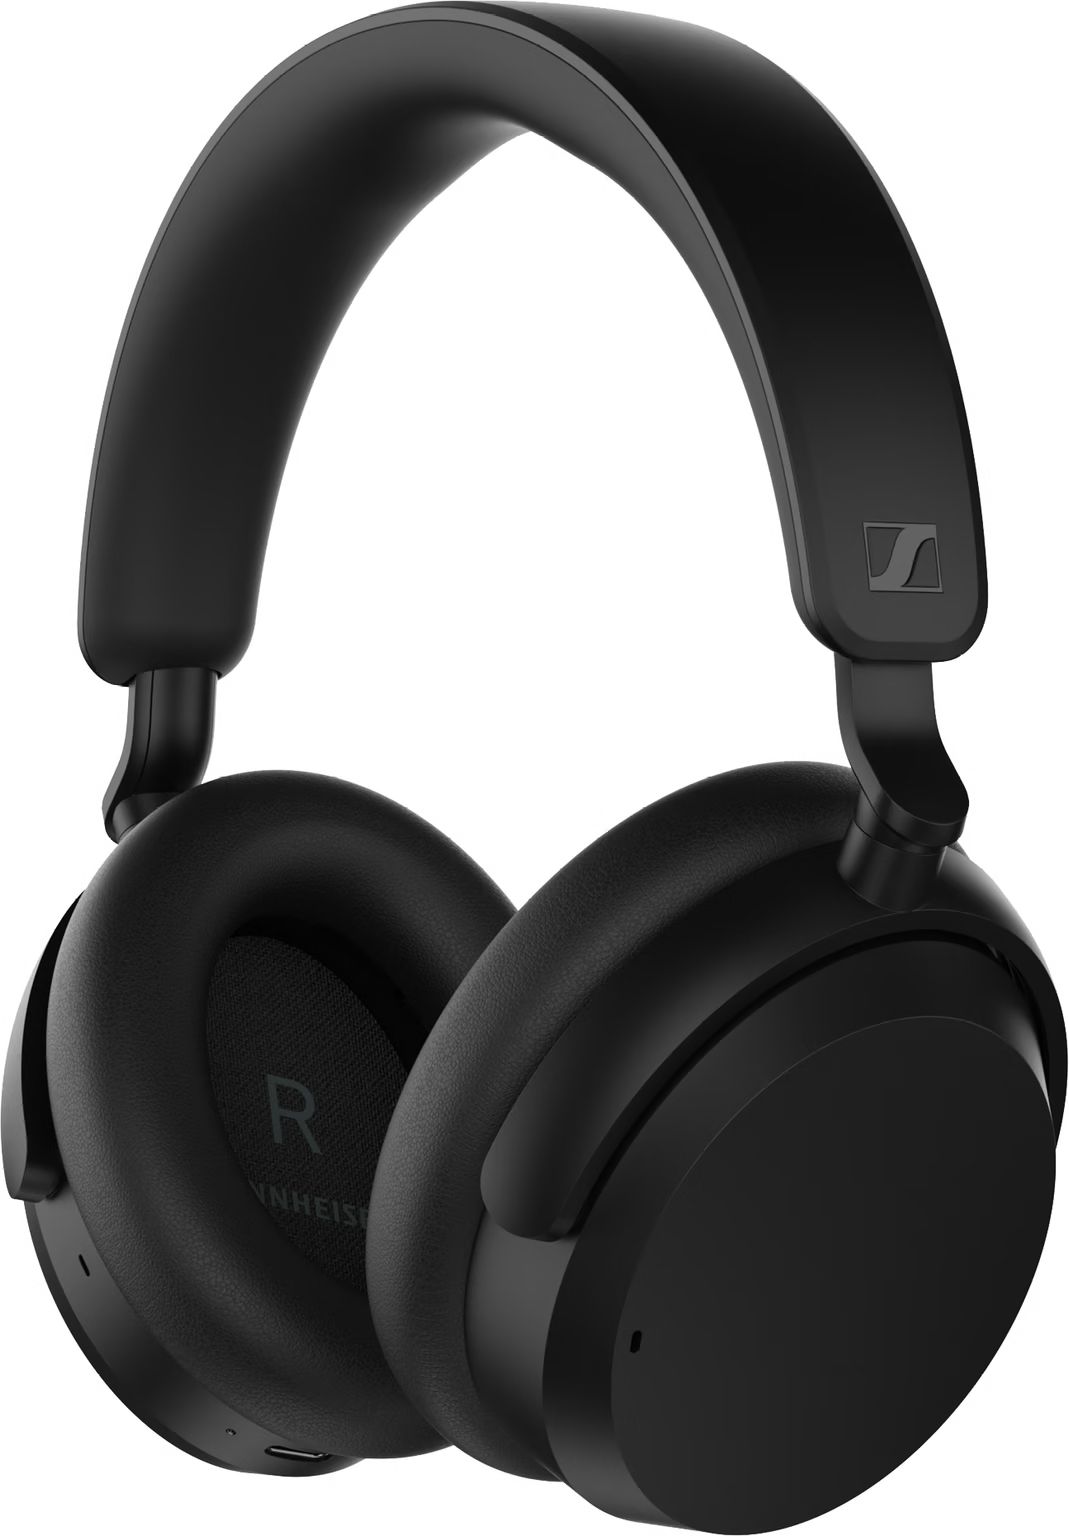 A pair of black headphones on a white background.